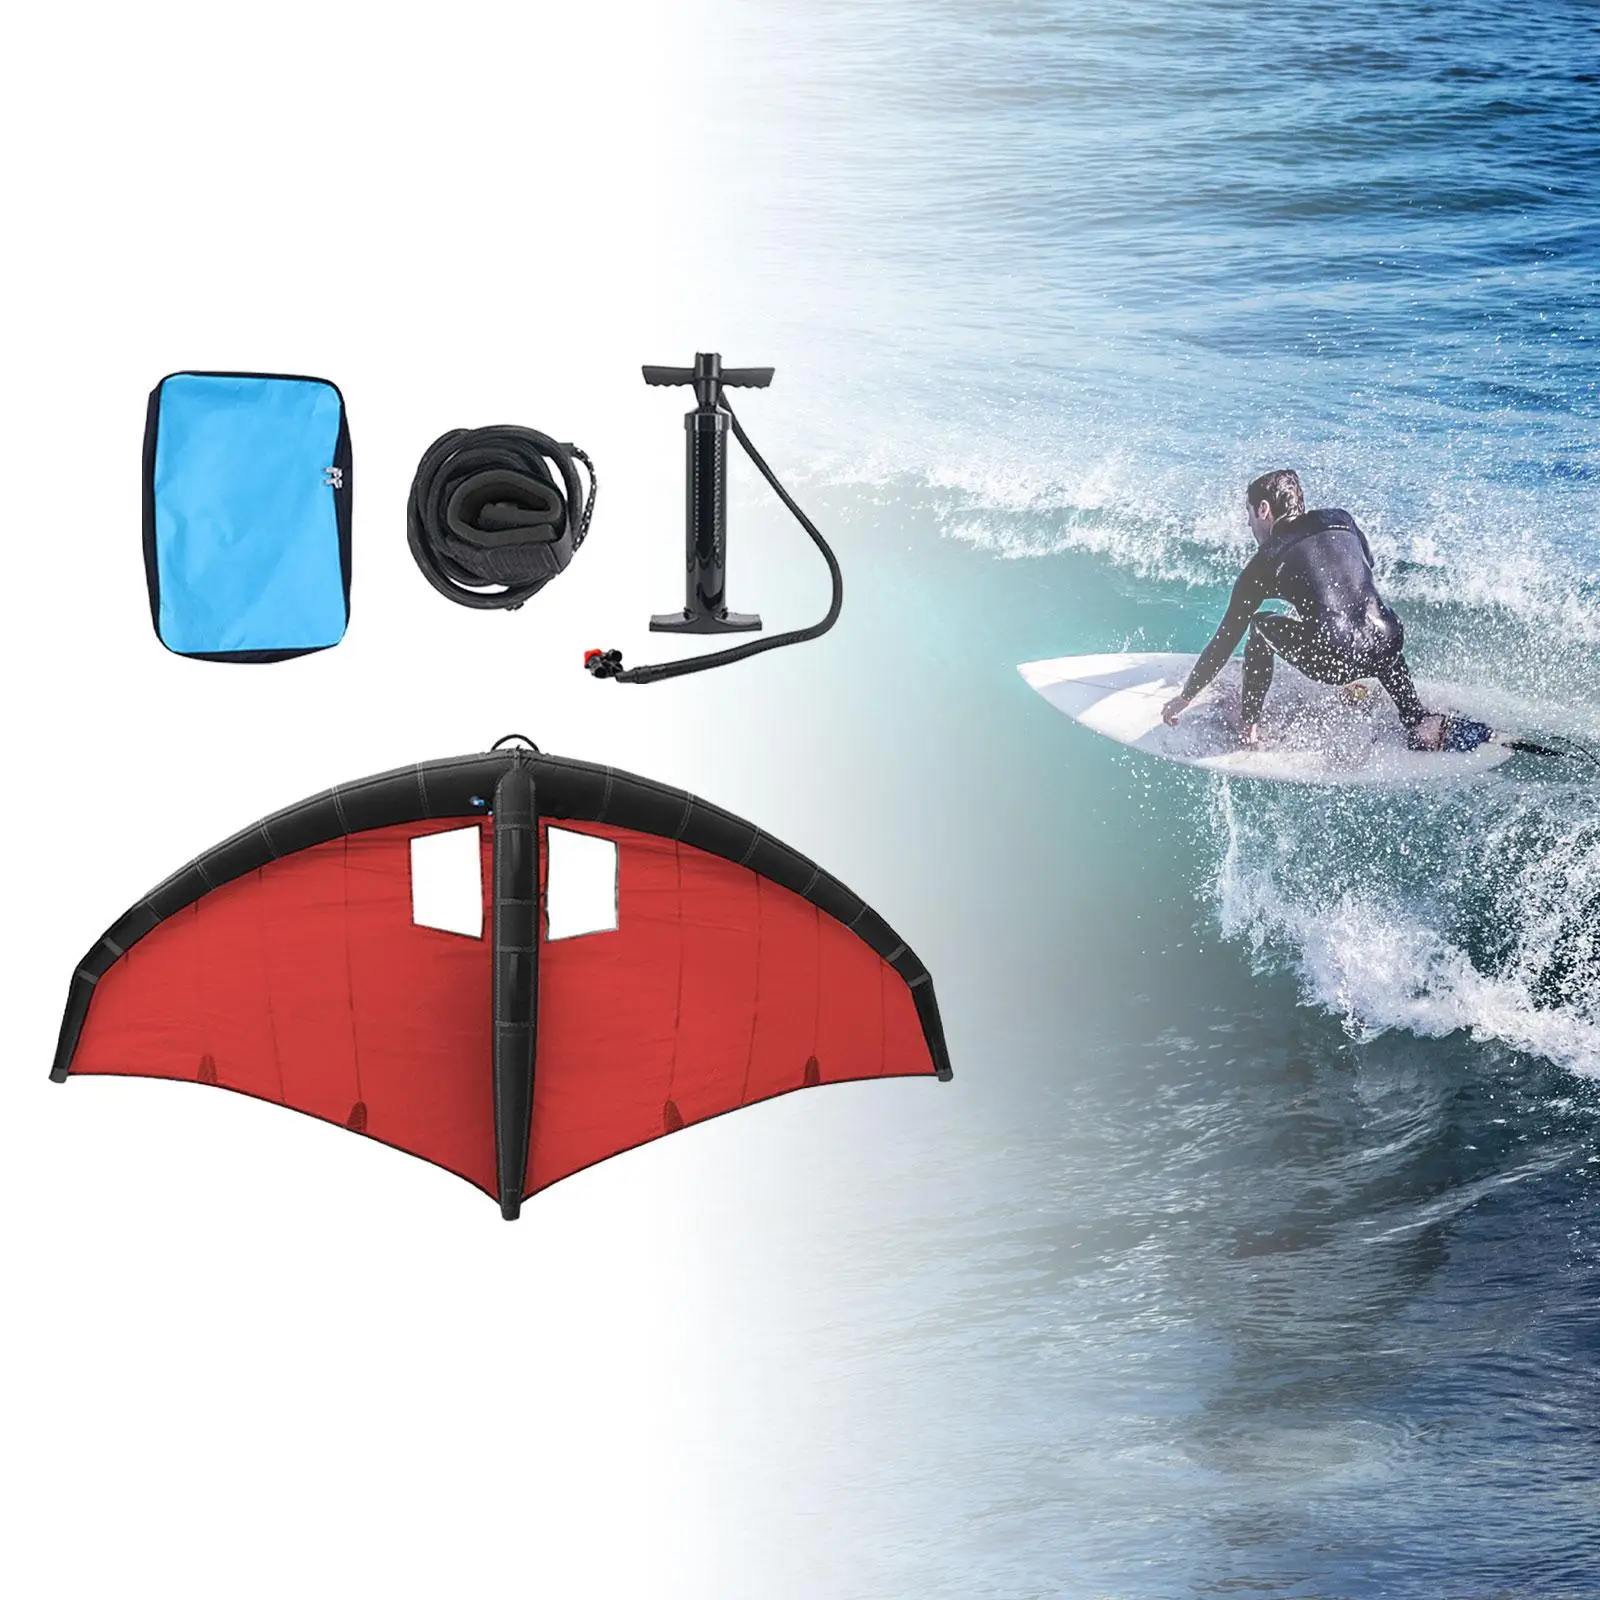 

Inflatable Surfing Wing Windsurfing Sail for Windsurfing Surfing Kiteboard